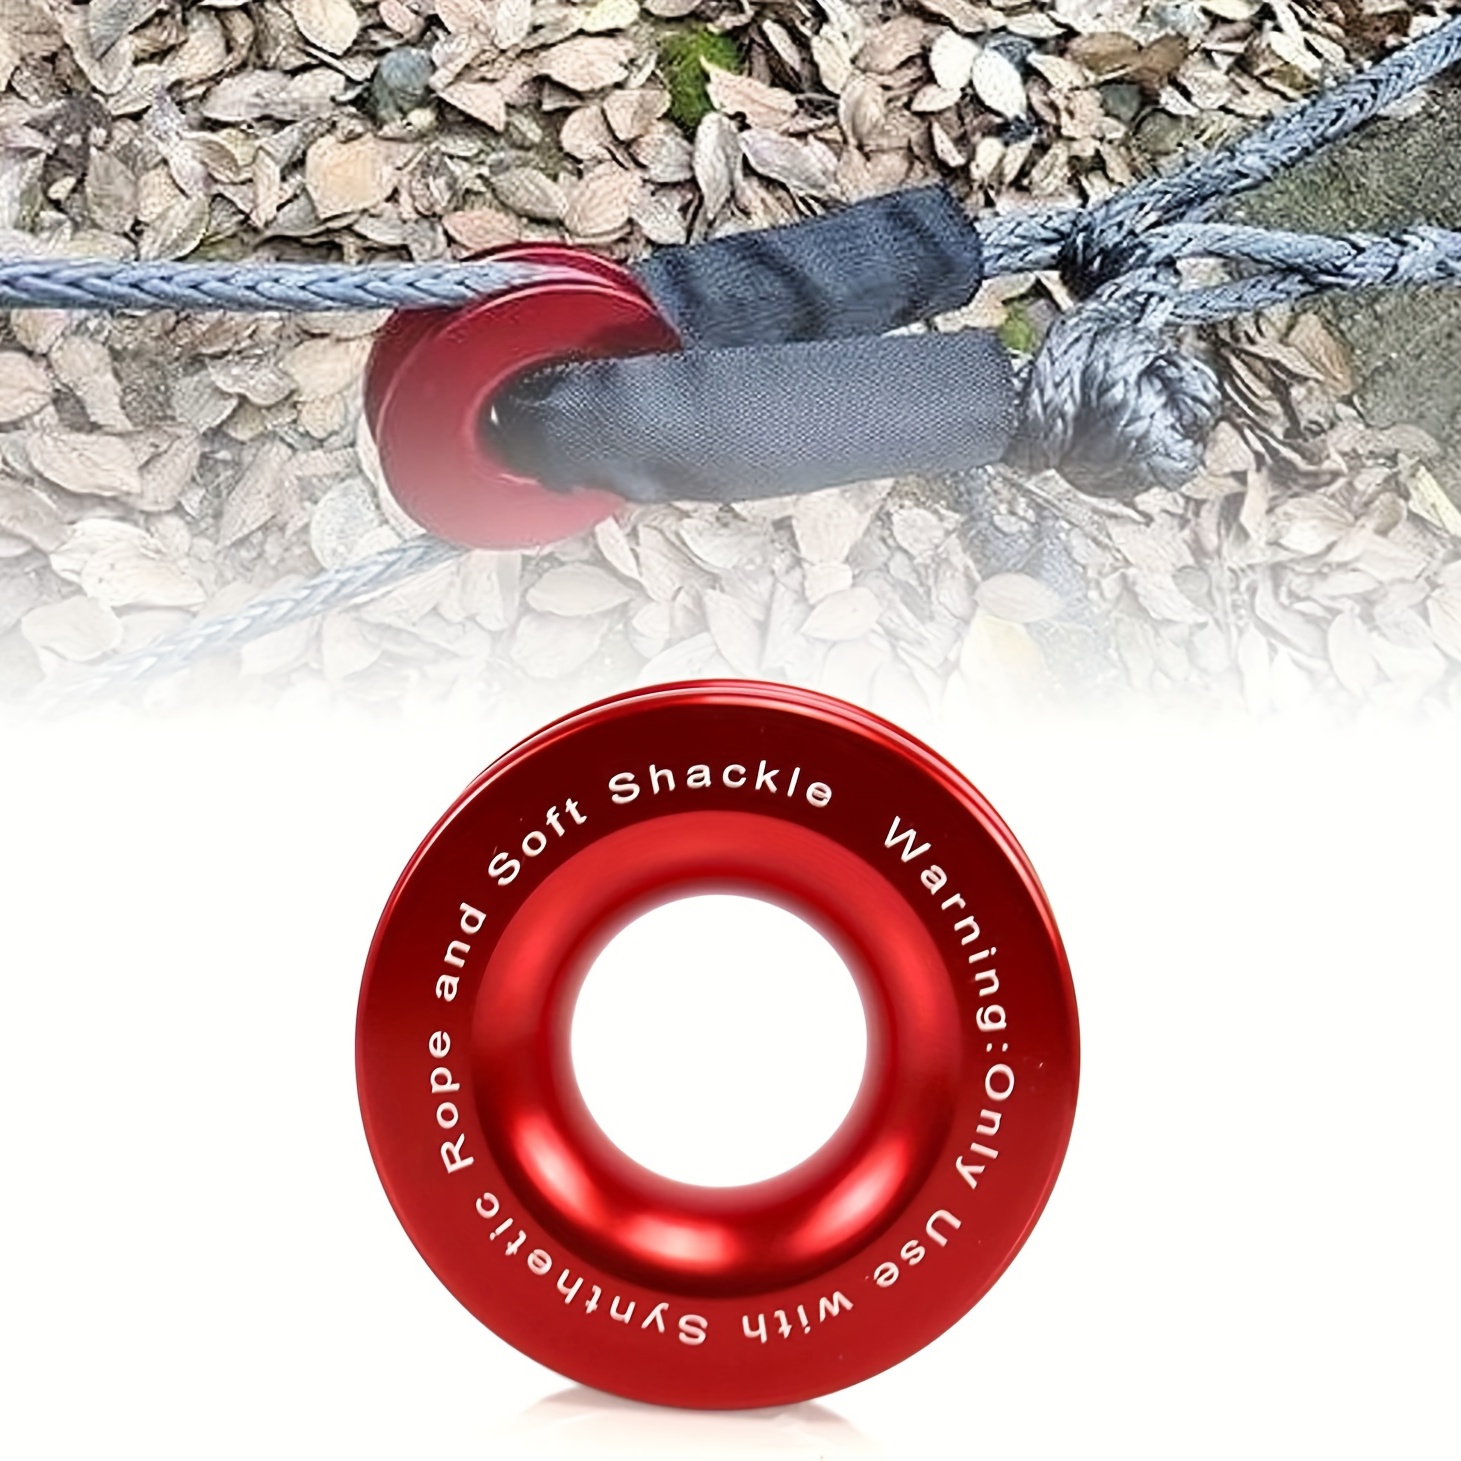 Off-Road Recovery Kit Snatch Block/Shackle/Winch Rope+Hook/Tow